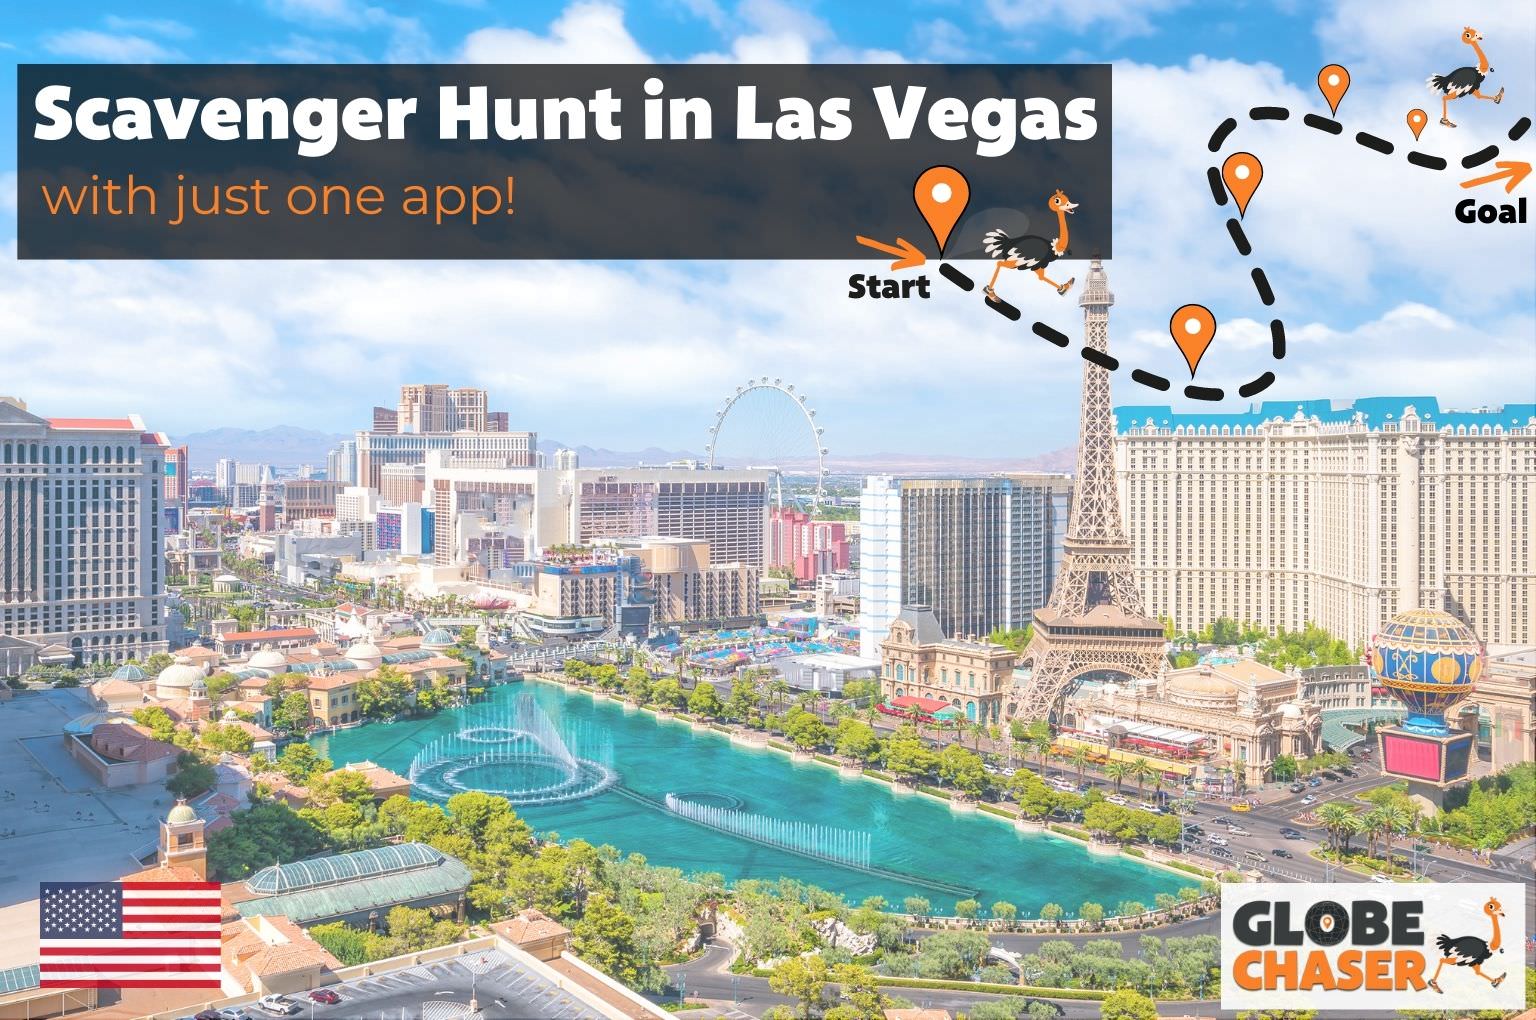 Scavenger Hunt in Las Vegas, USA - Family Activities with the Globe Chaser App for Outdoor Fun